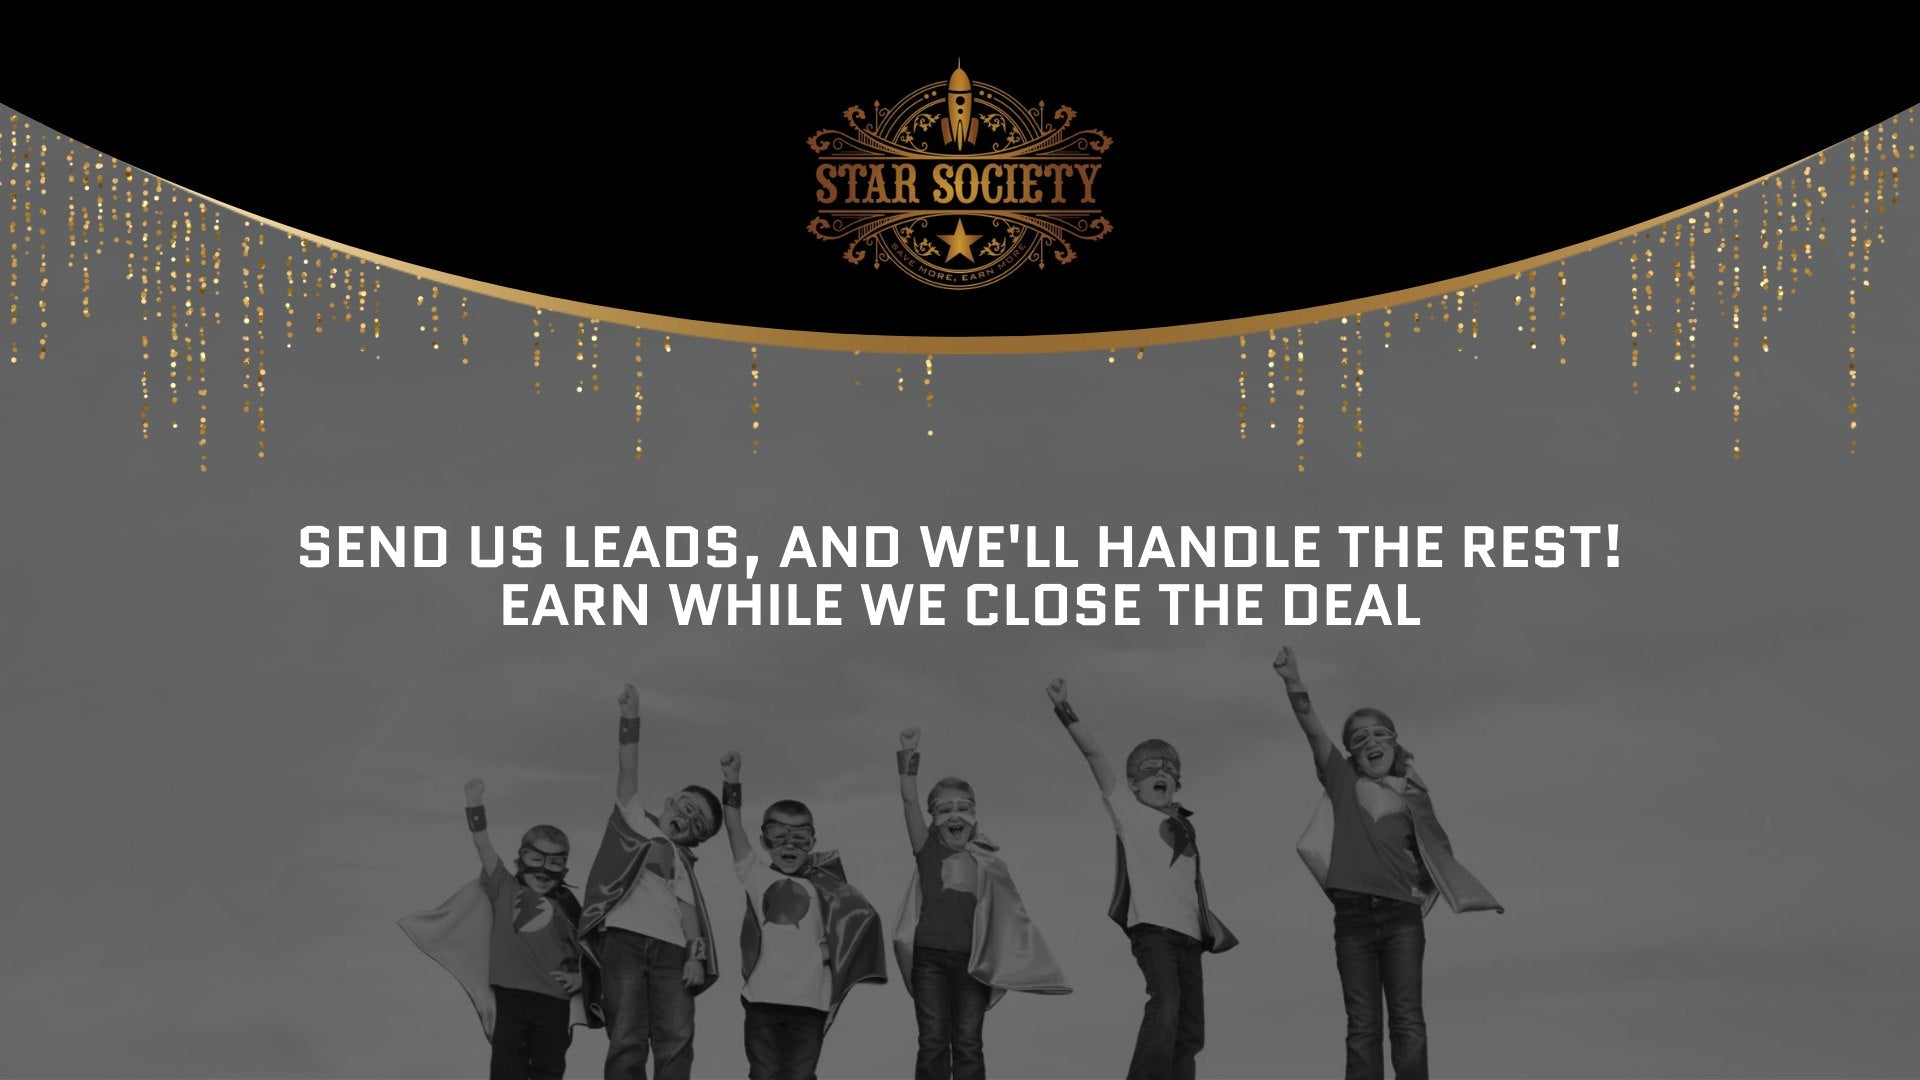 SOAR YOUR QUICKBOOKS® SALES WITH STAR SOCIETY